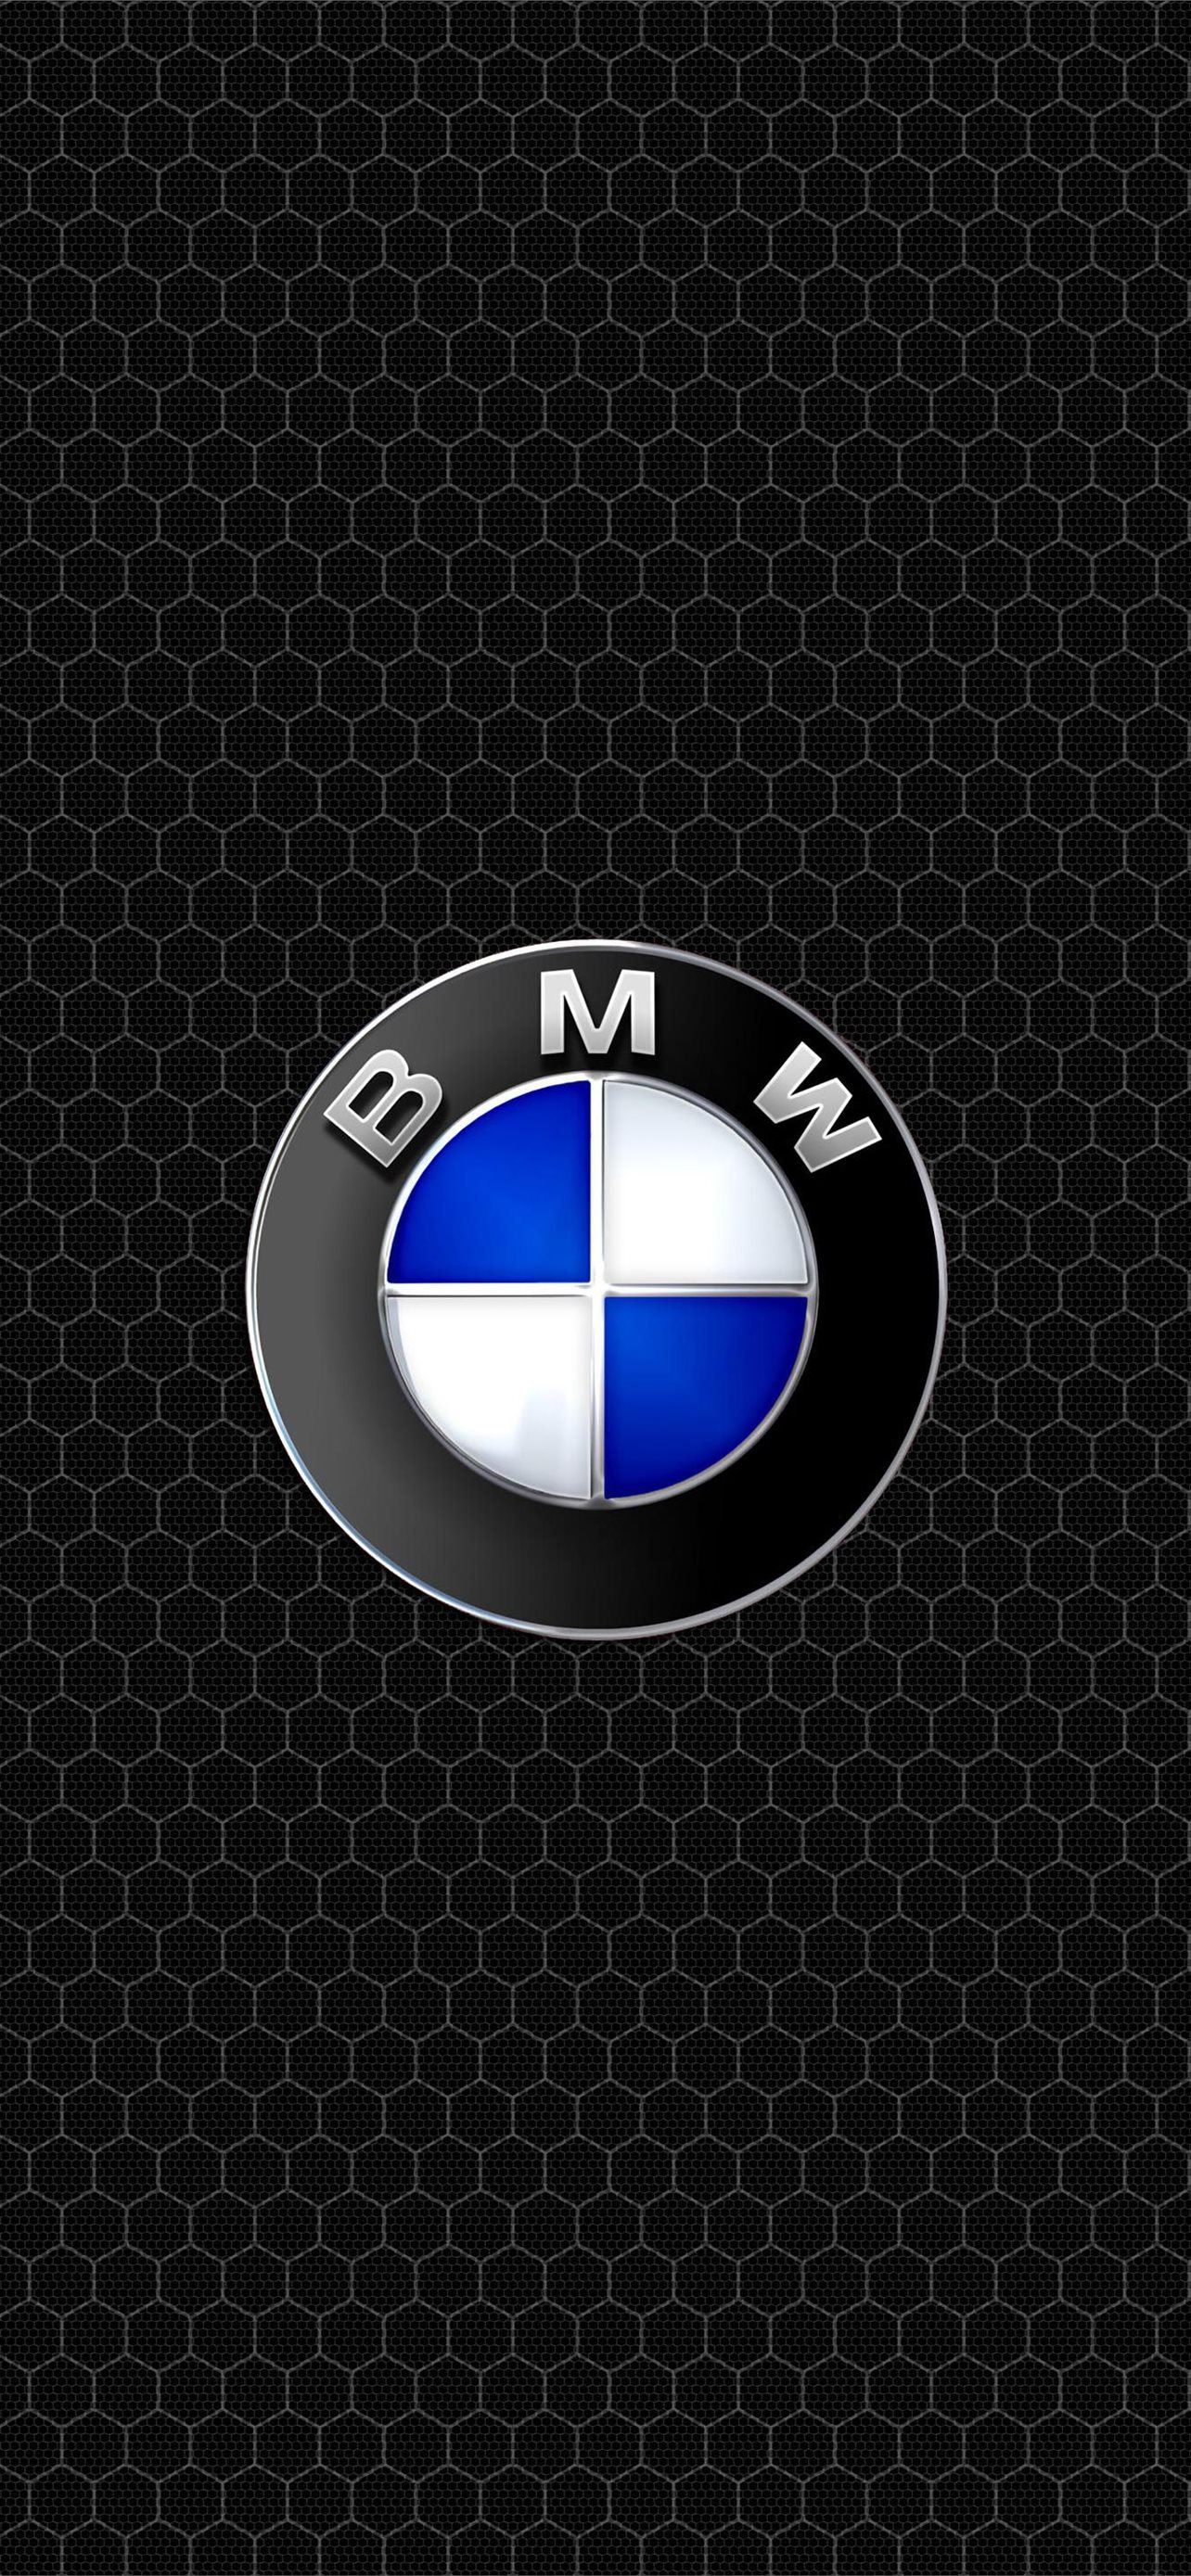 bmw logo iPhone Wallpapers Free Download